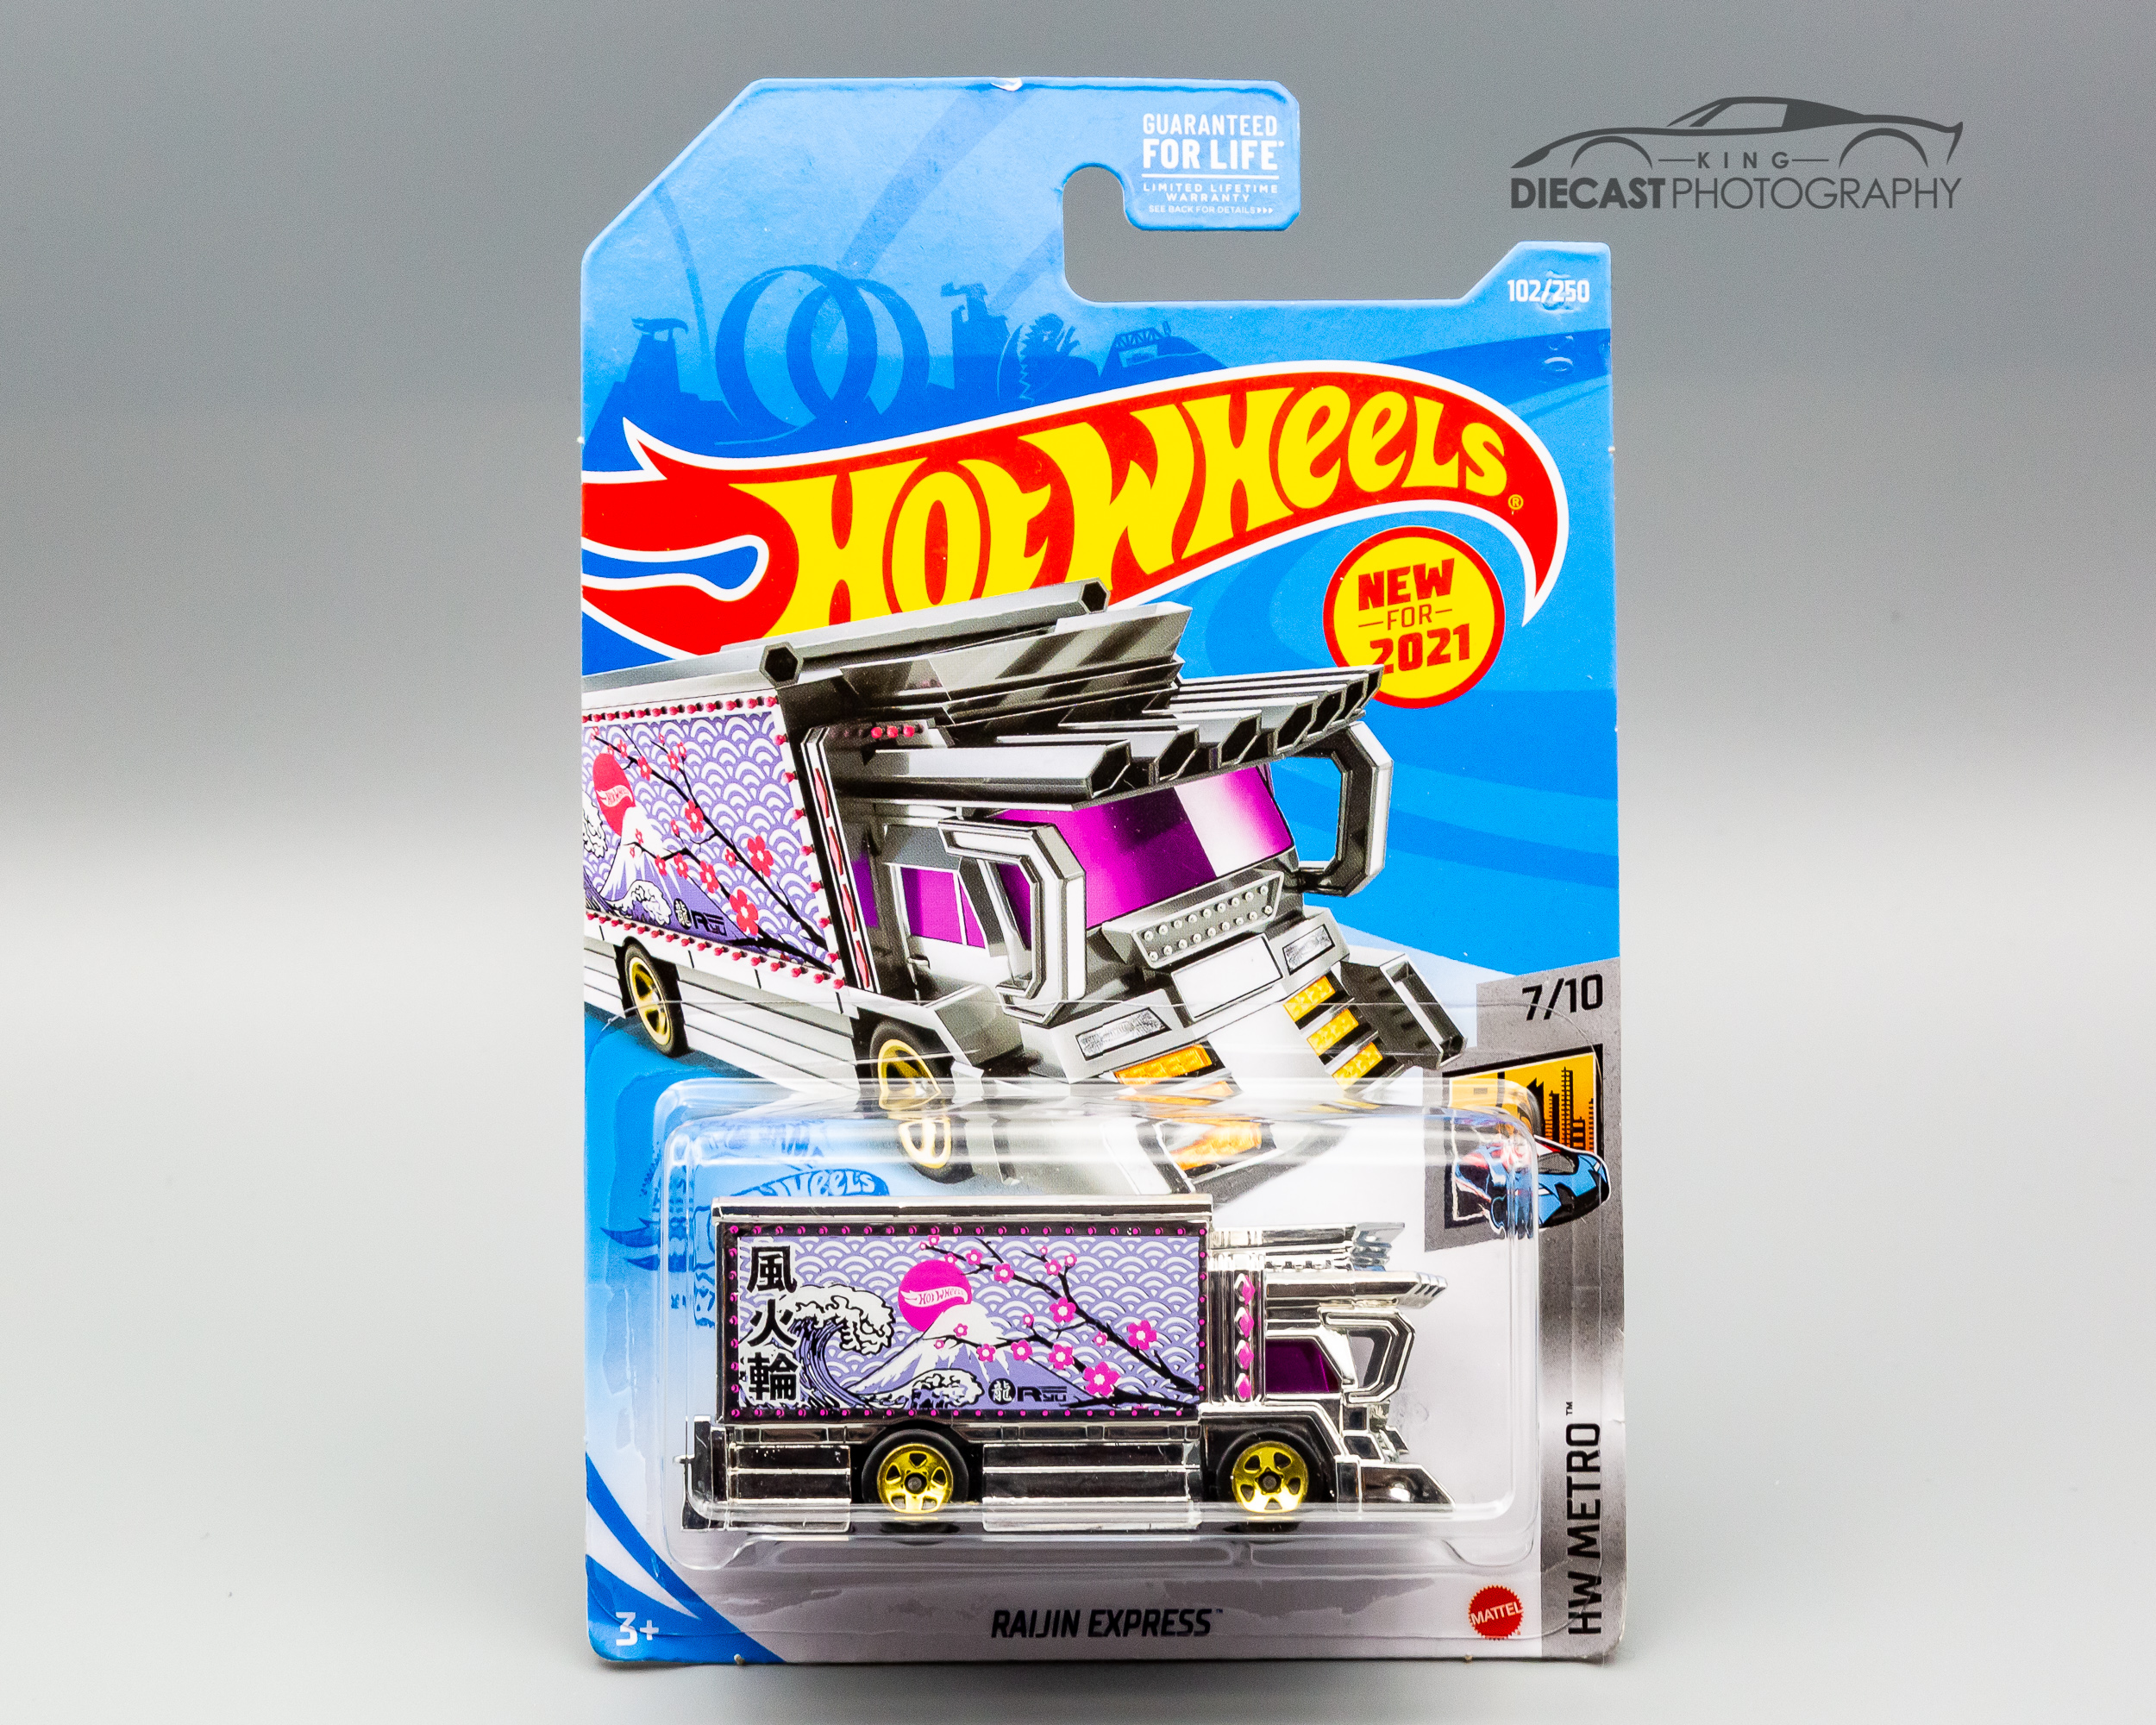 Raijin Express-Chinese Blossoms Details about   **NEW 2021 Hot Wheels 7/10 HW Metro 